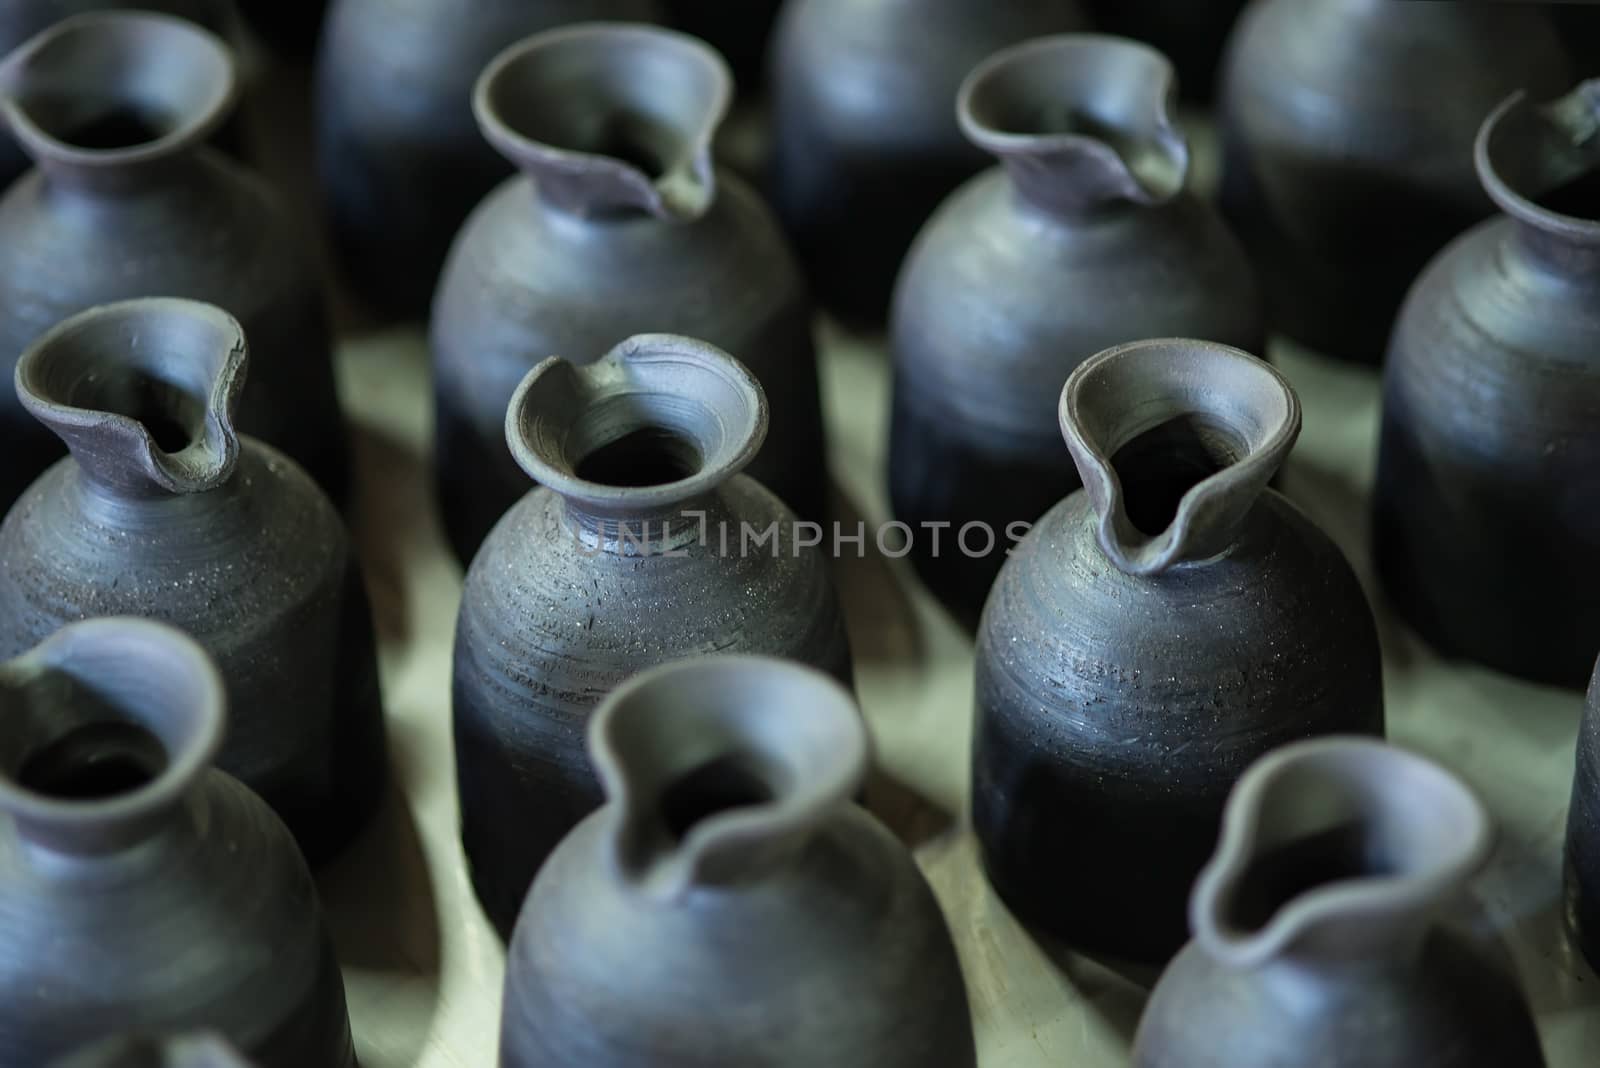 There are many clay pots in the workshop by Yuri2012